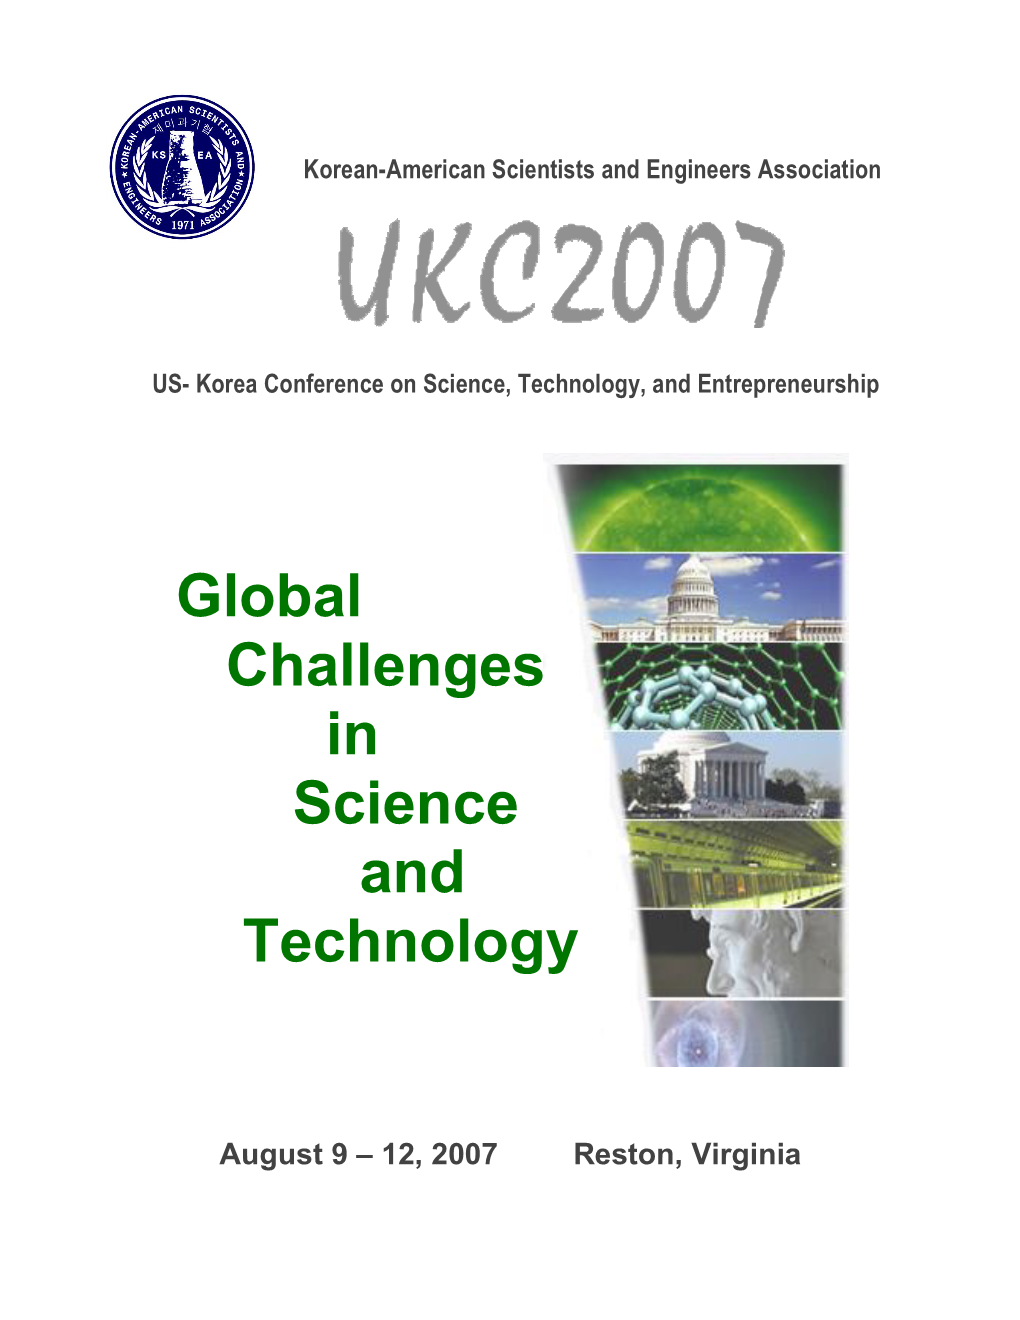 Global Challenges in Science and Technology